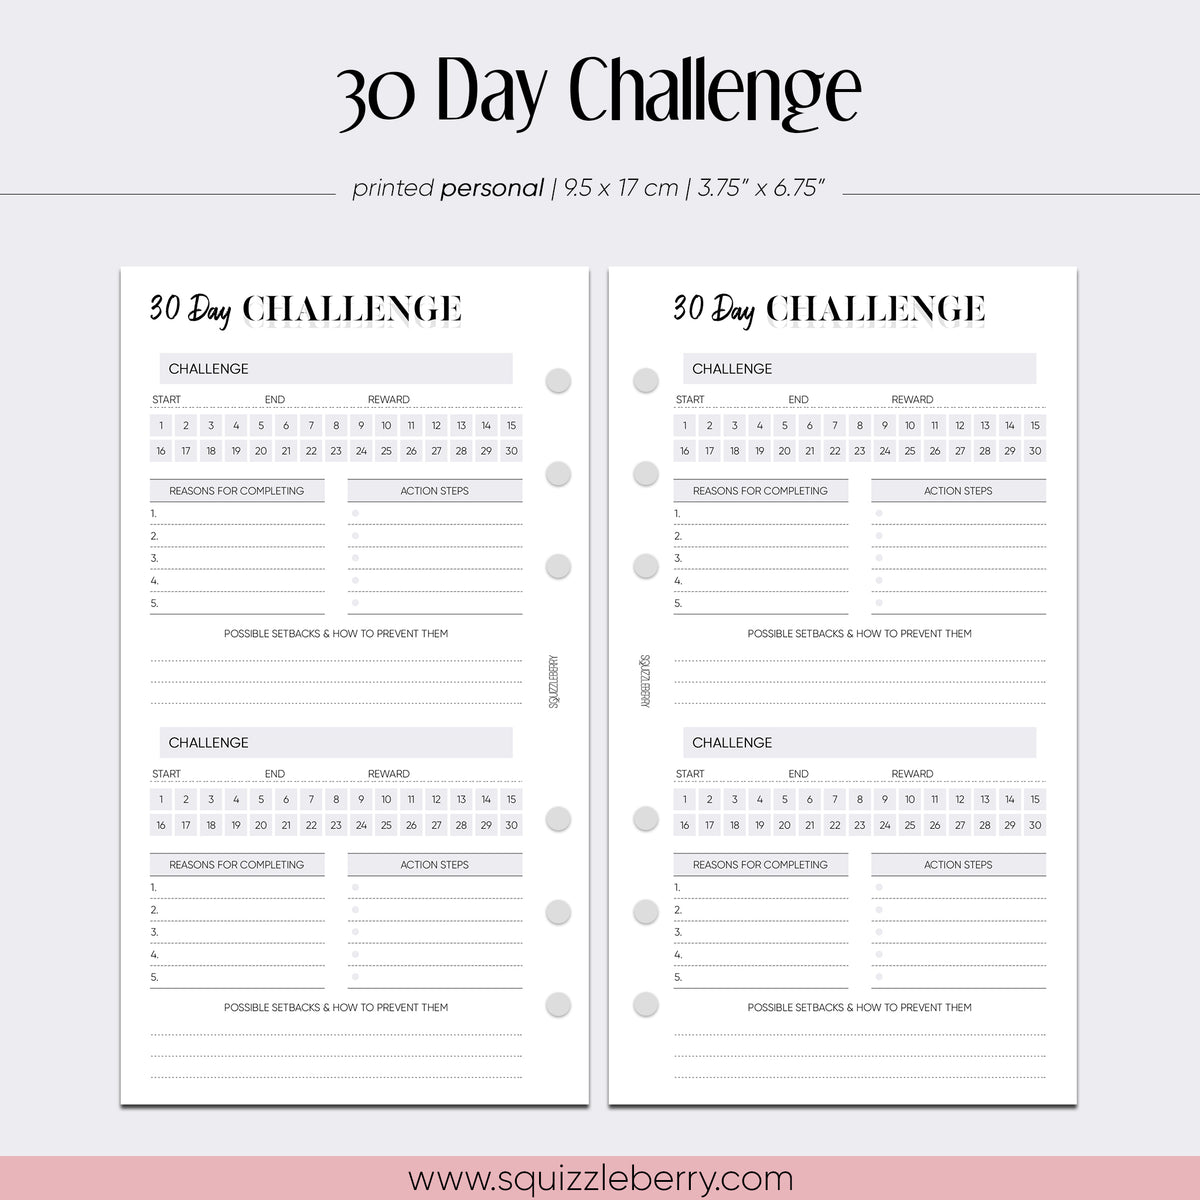 30 Day Challenge - Personal | SquizzleBerry